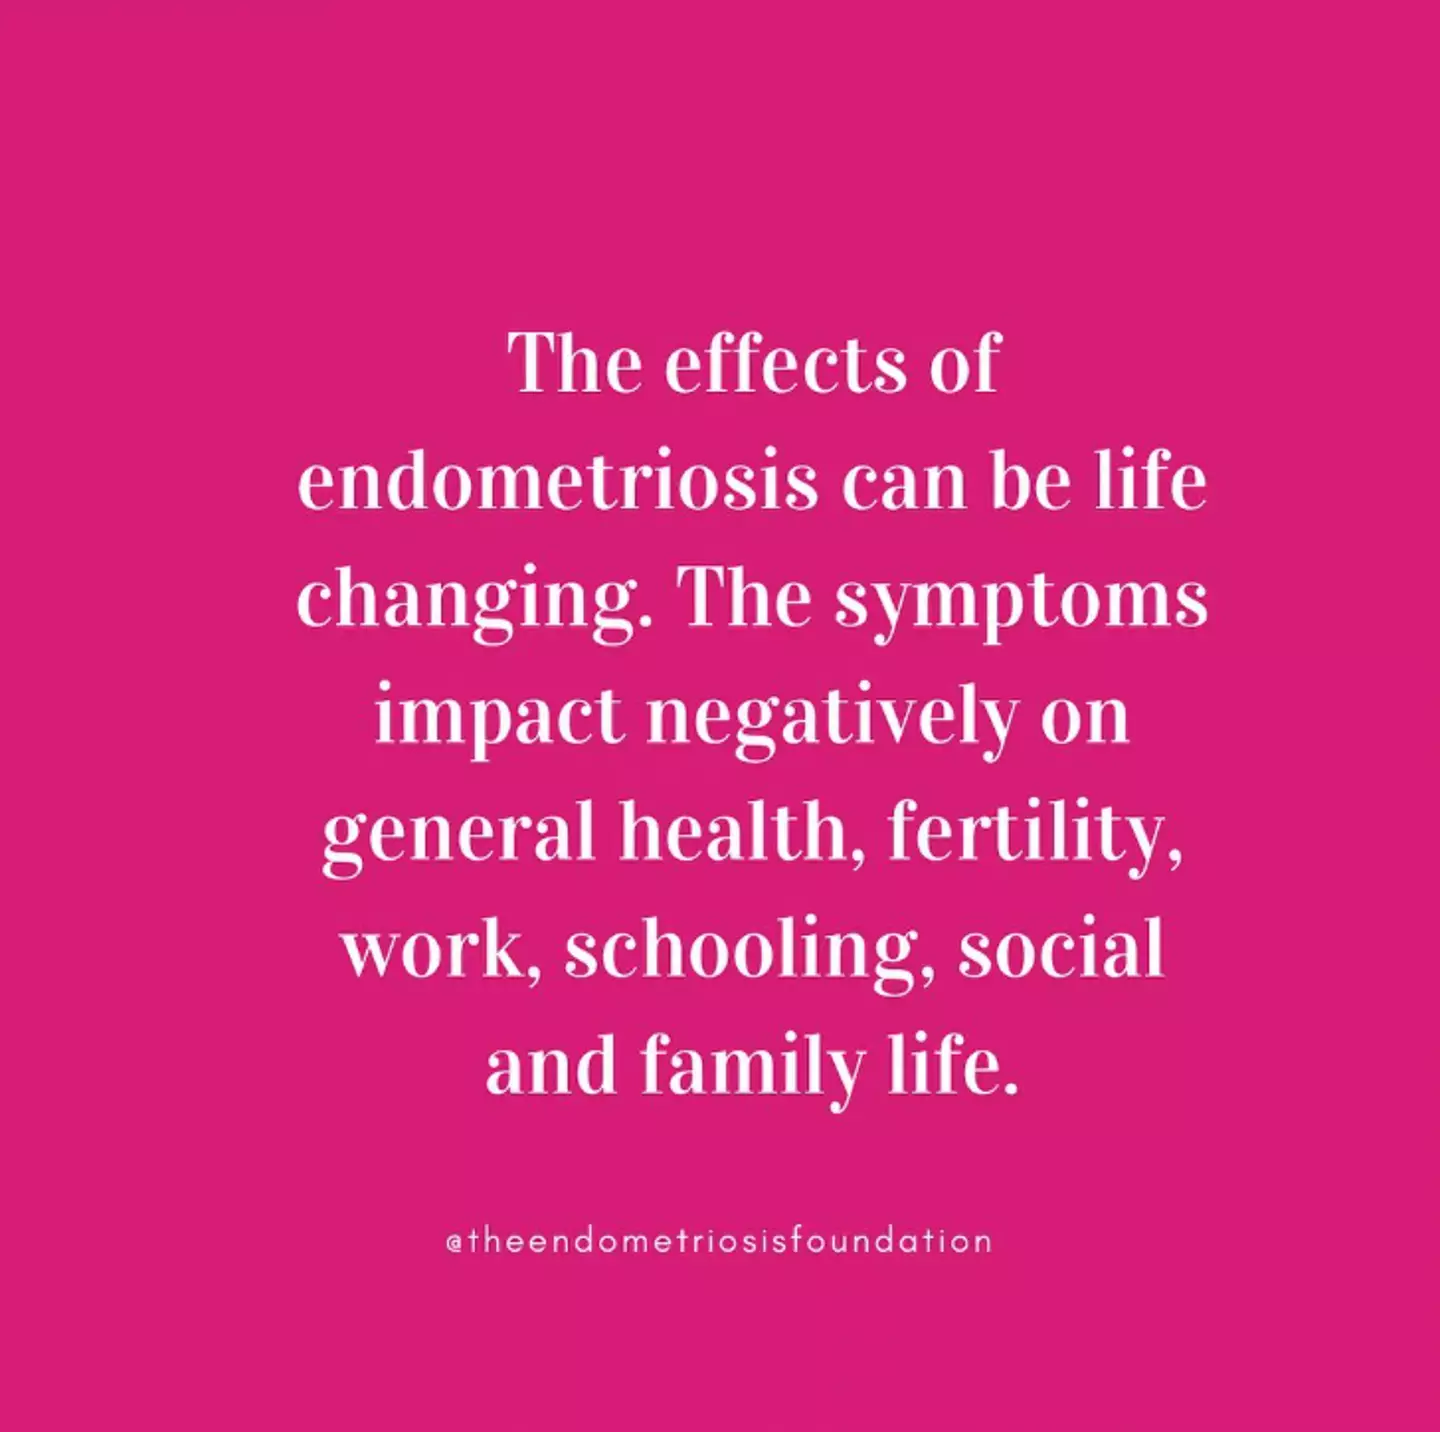 Endometriosis can affect every aspect of someone's life.